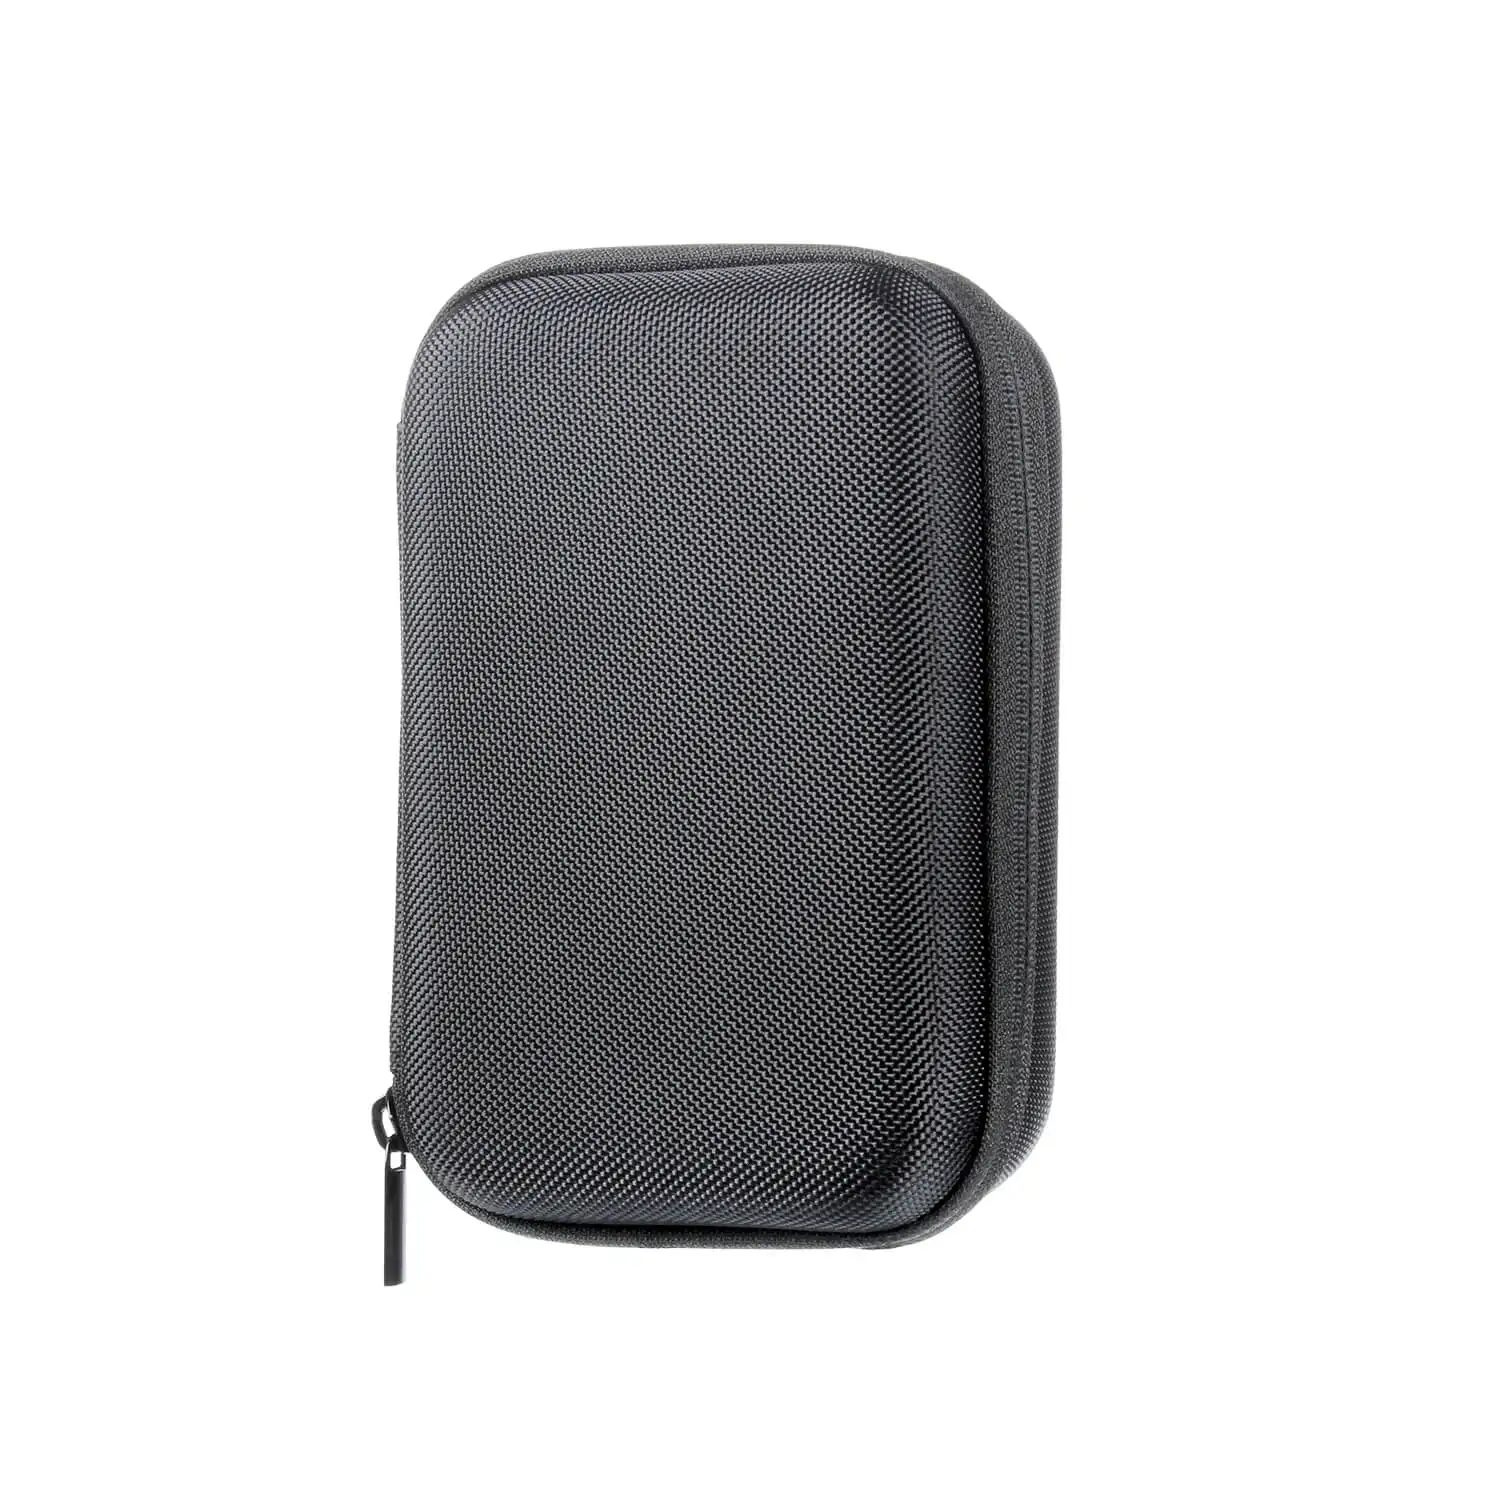 Inkbird Carrying Case of Travel Storage Compatible for IBT4XS Probe 6.7x4.7x2.3" 